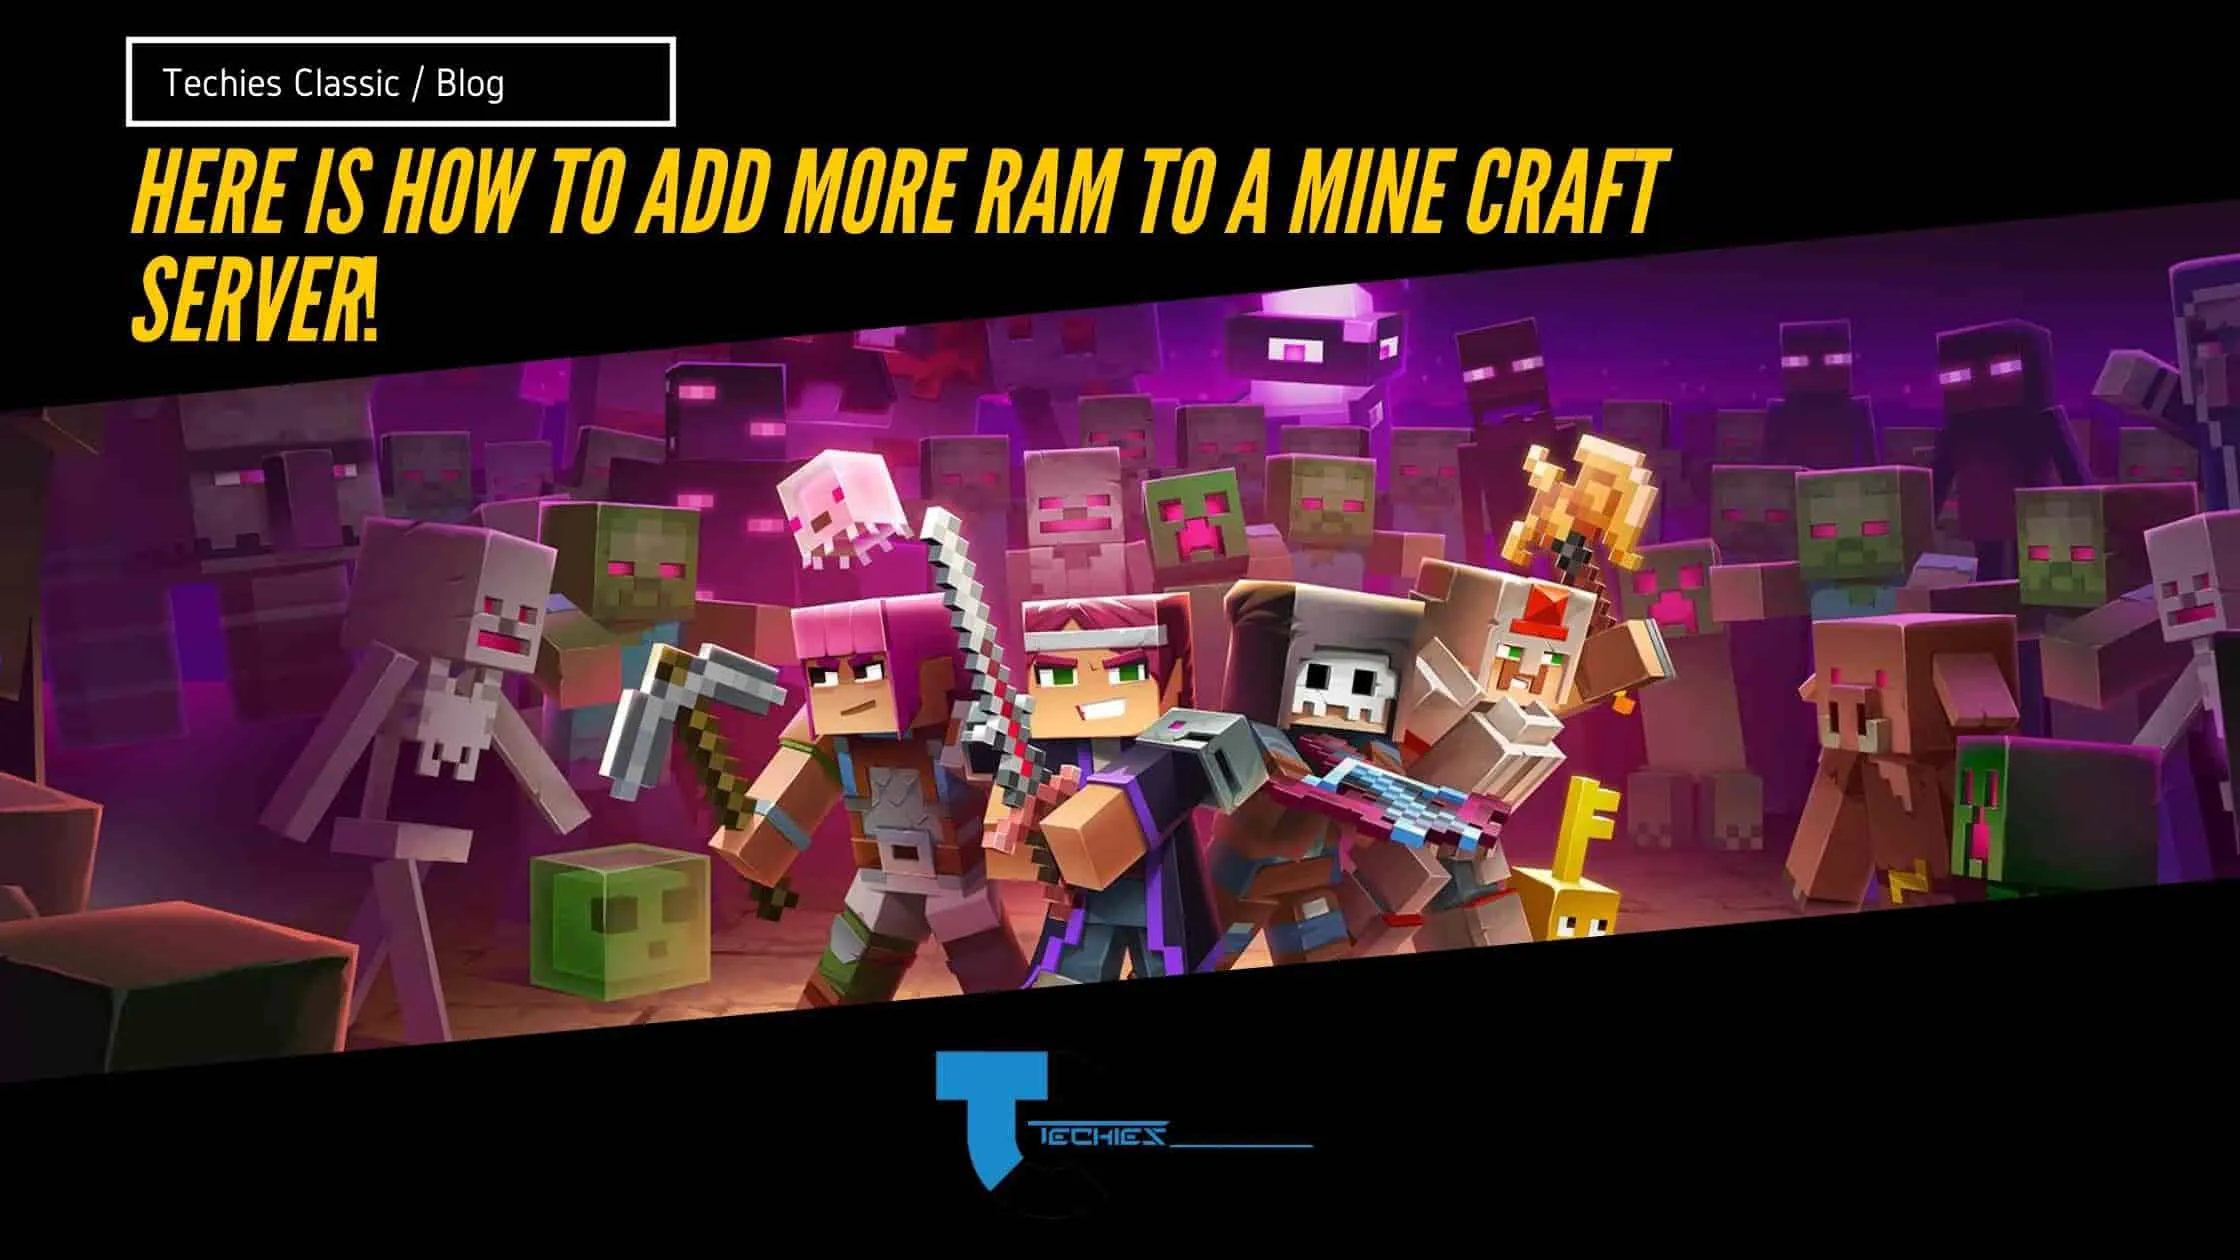 How to add more ram to a mine craft server